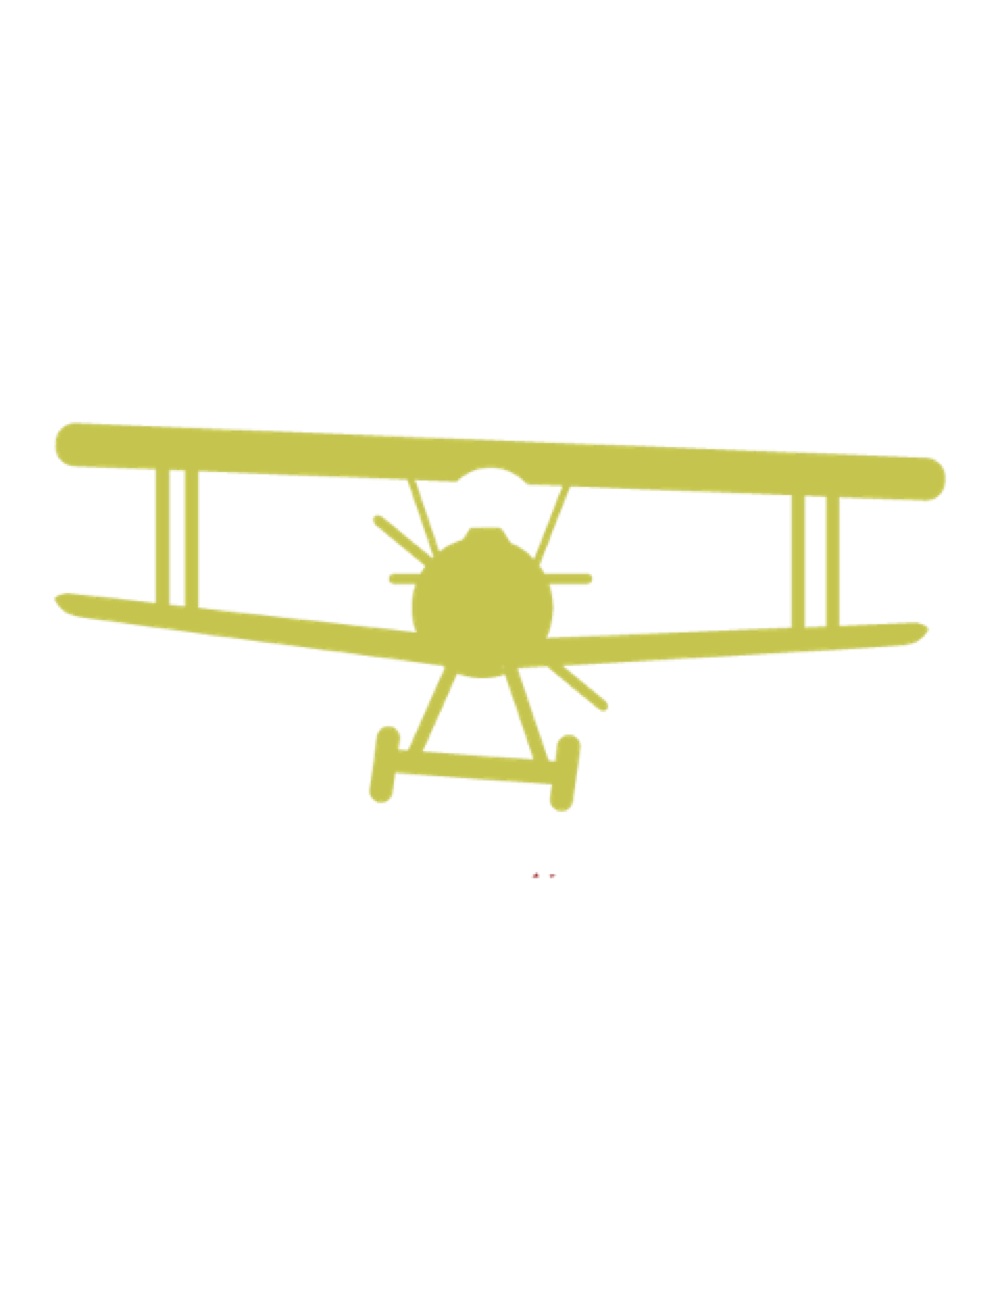 Free Old Airplane Cliparts, Download Free Clip Art, Free.